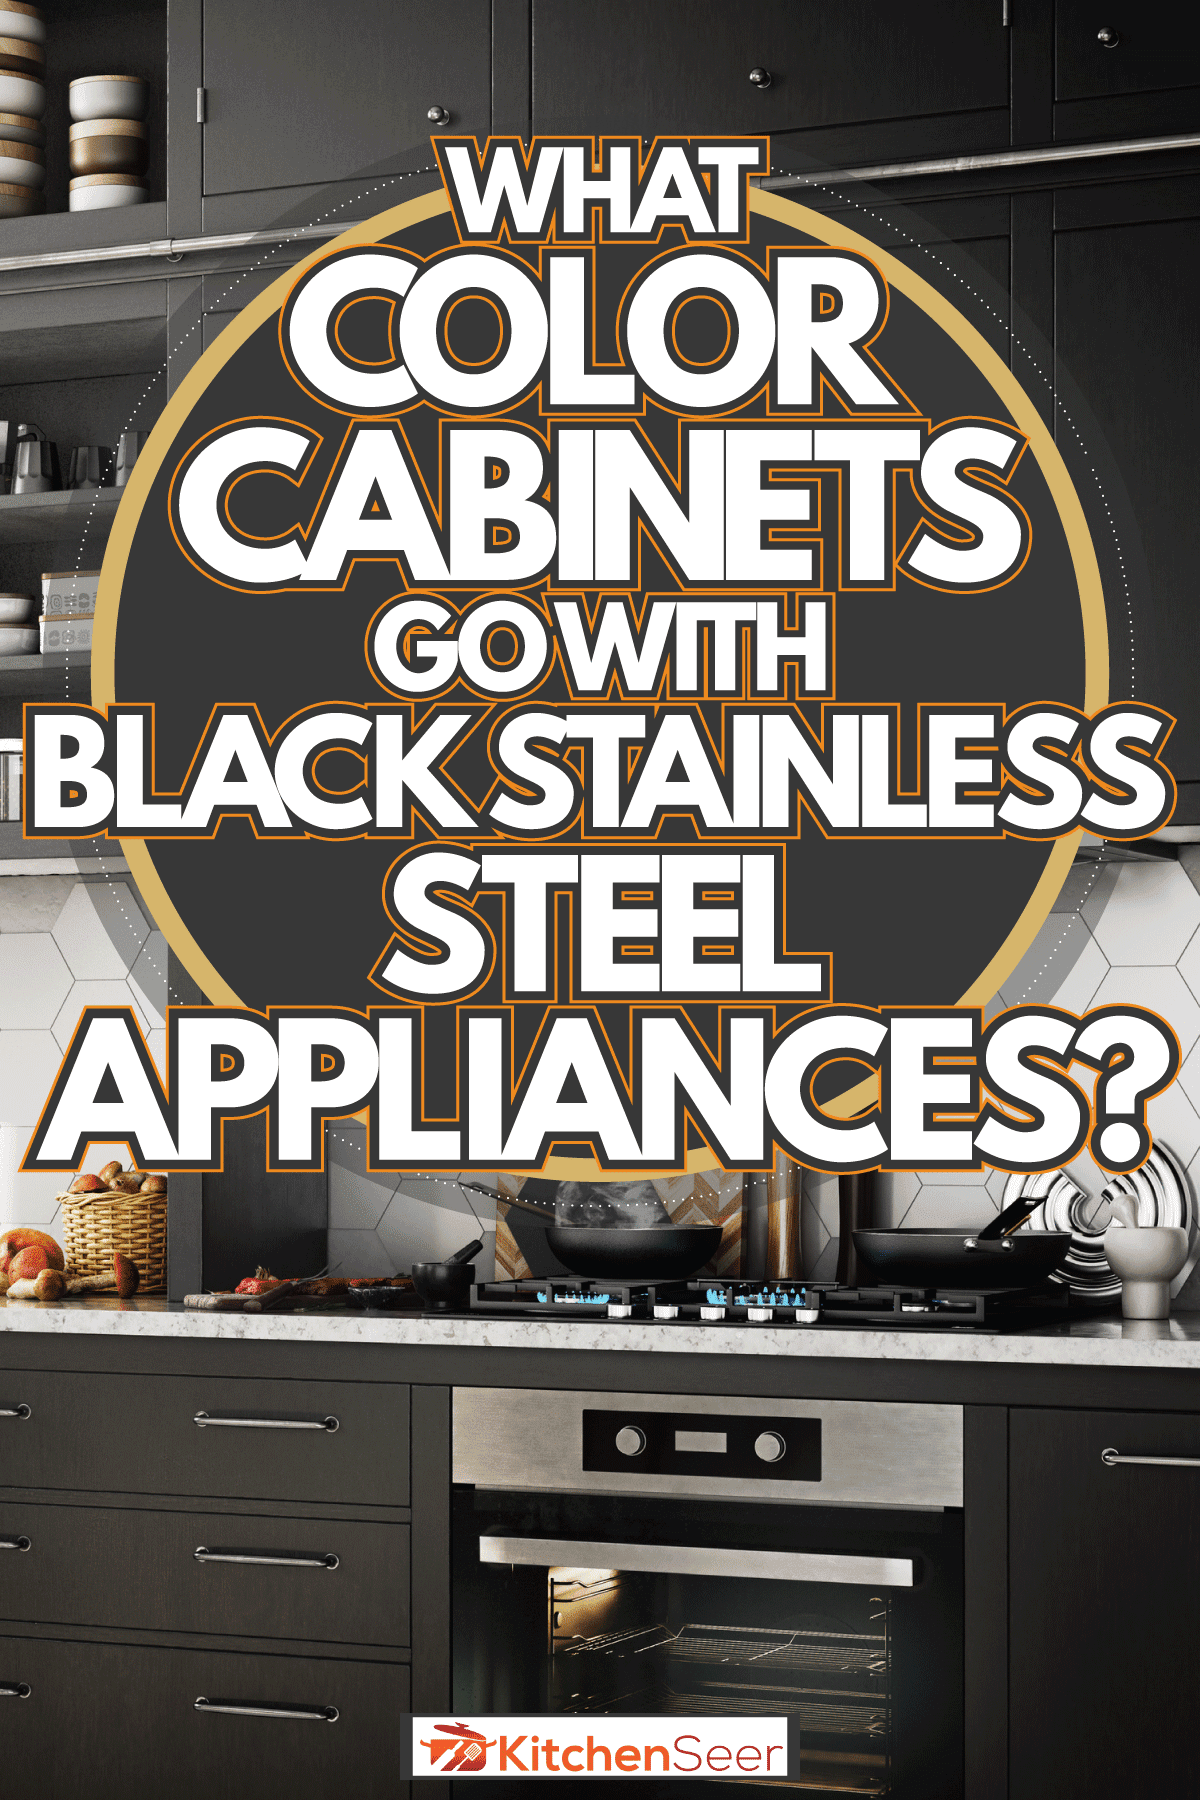 Color compatibilities of kitchen cabinet and black stainless appliances, What Color Cabinets Go With Black Stainless Steel Appliances?